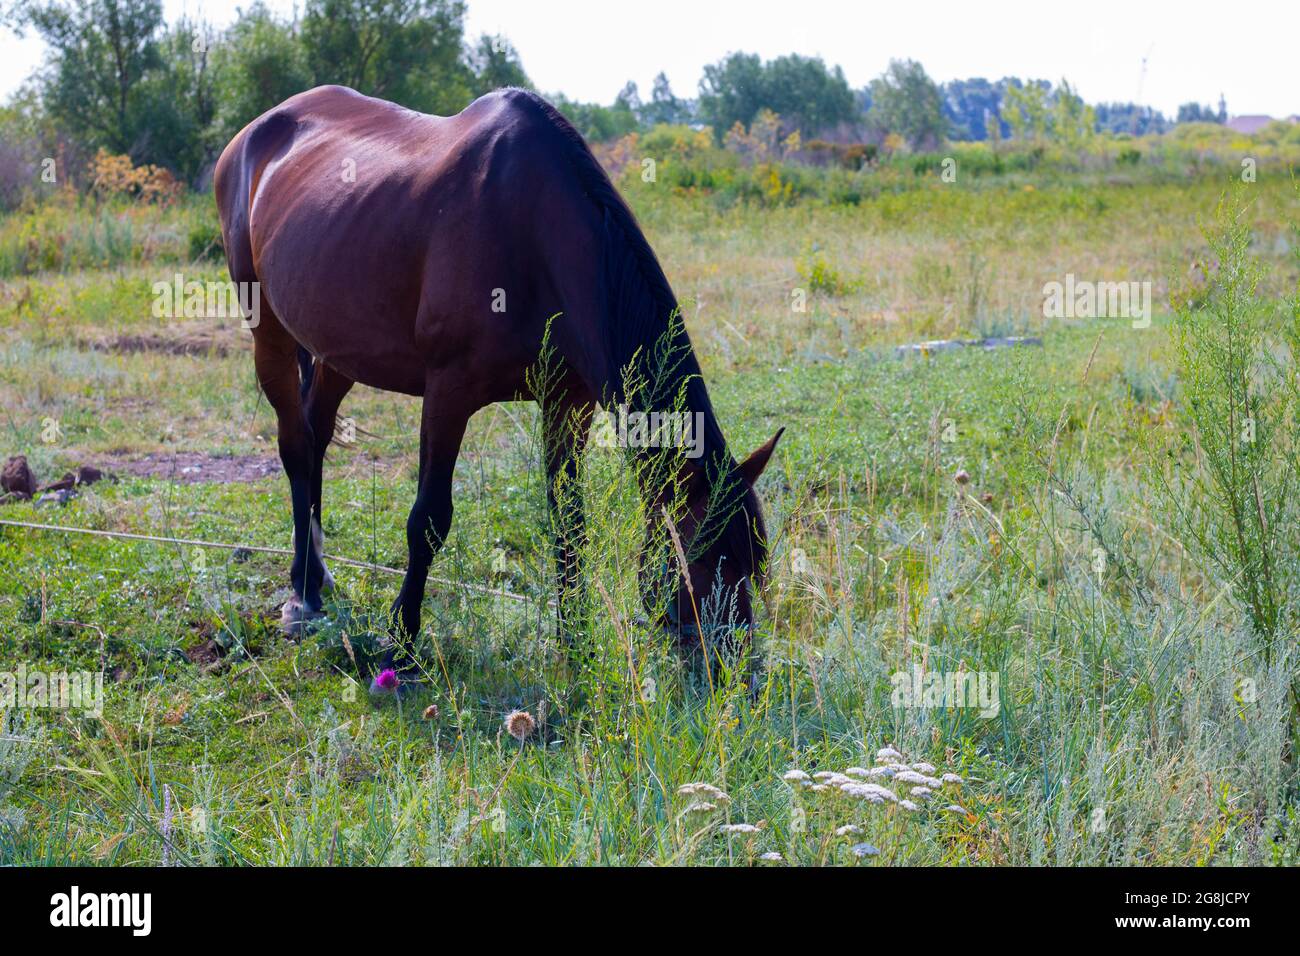 Dark brown horse eating grass in the village Stock Photo